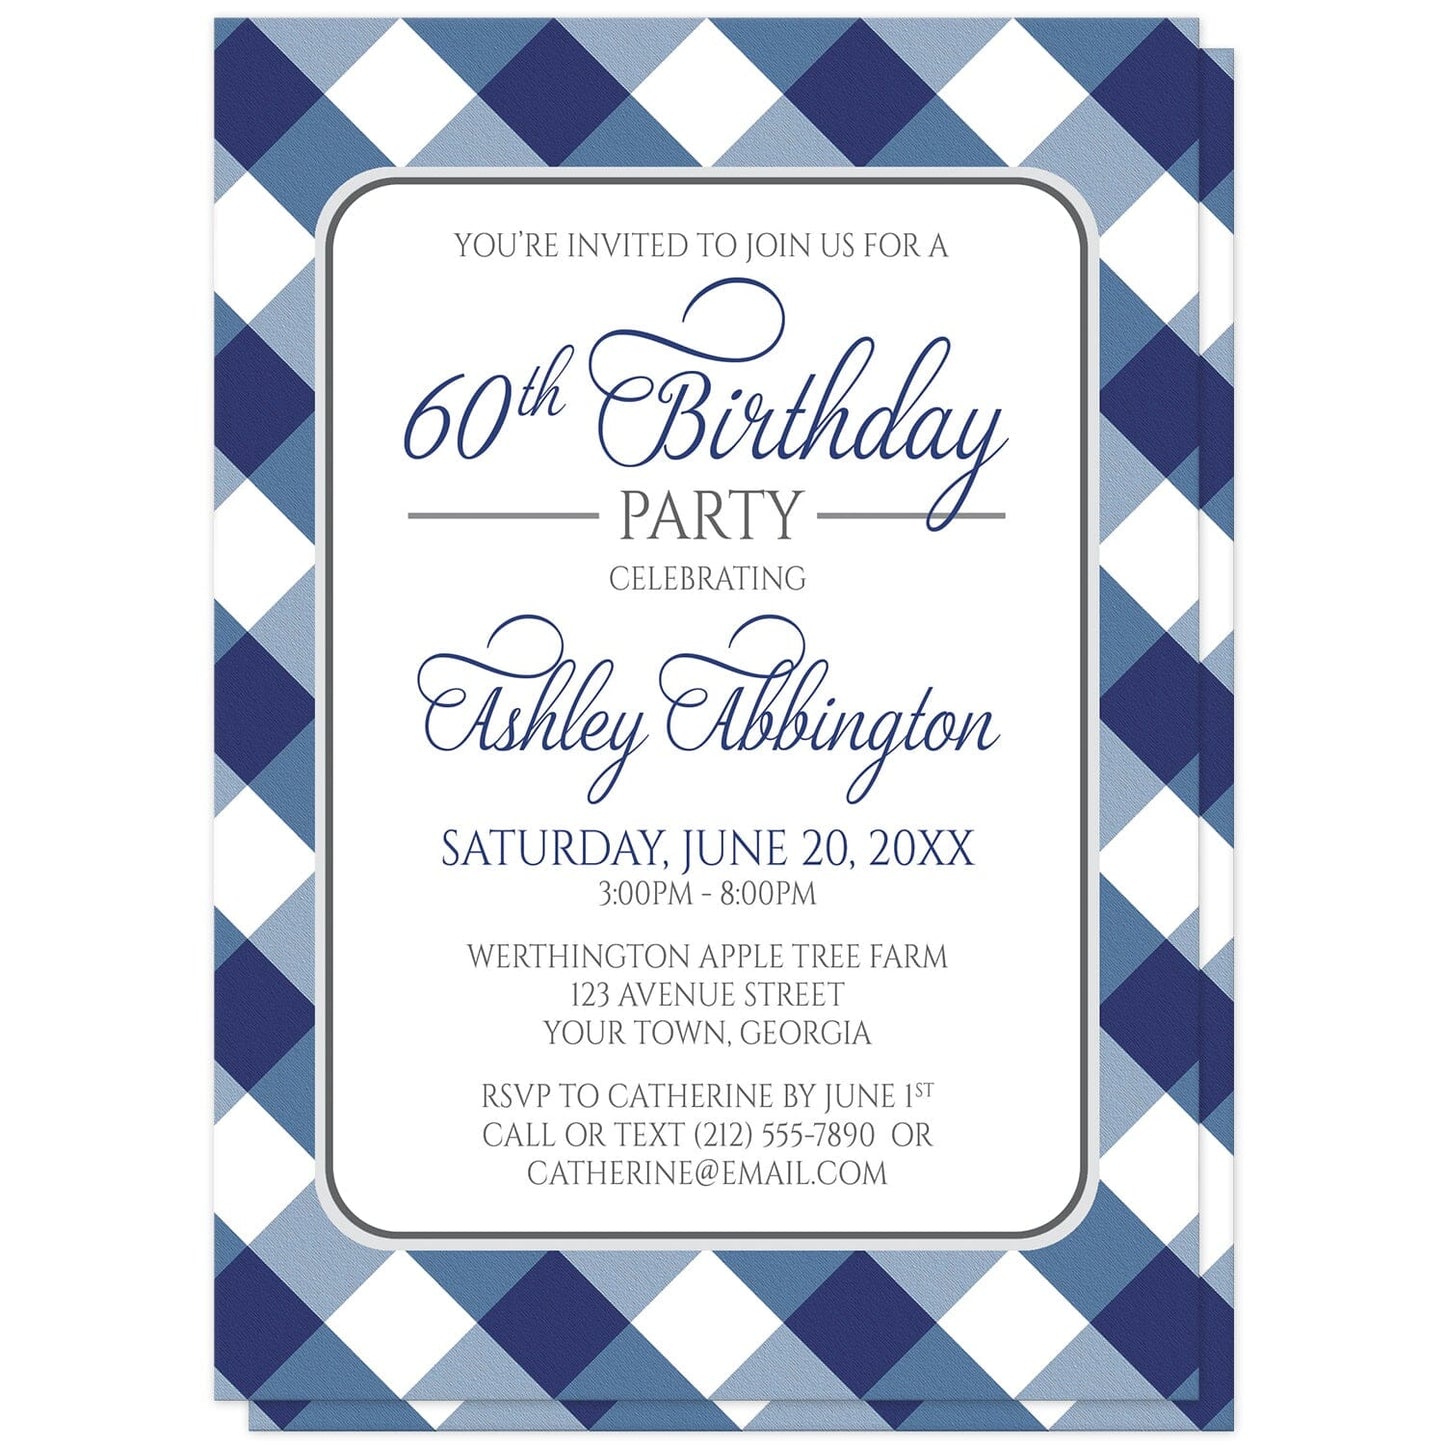 Navy Blue Gingham Birthday Party Invitations at Artistically Invited. Navy blue gingham birthday party invitations with your personalized party details custom printed in blue and gray inside a white rectangular area outlined in gray. The background design is a diagonal blue and white gingham pattern which is also printed on the back side. 